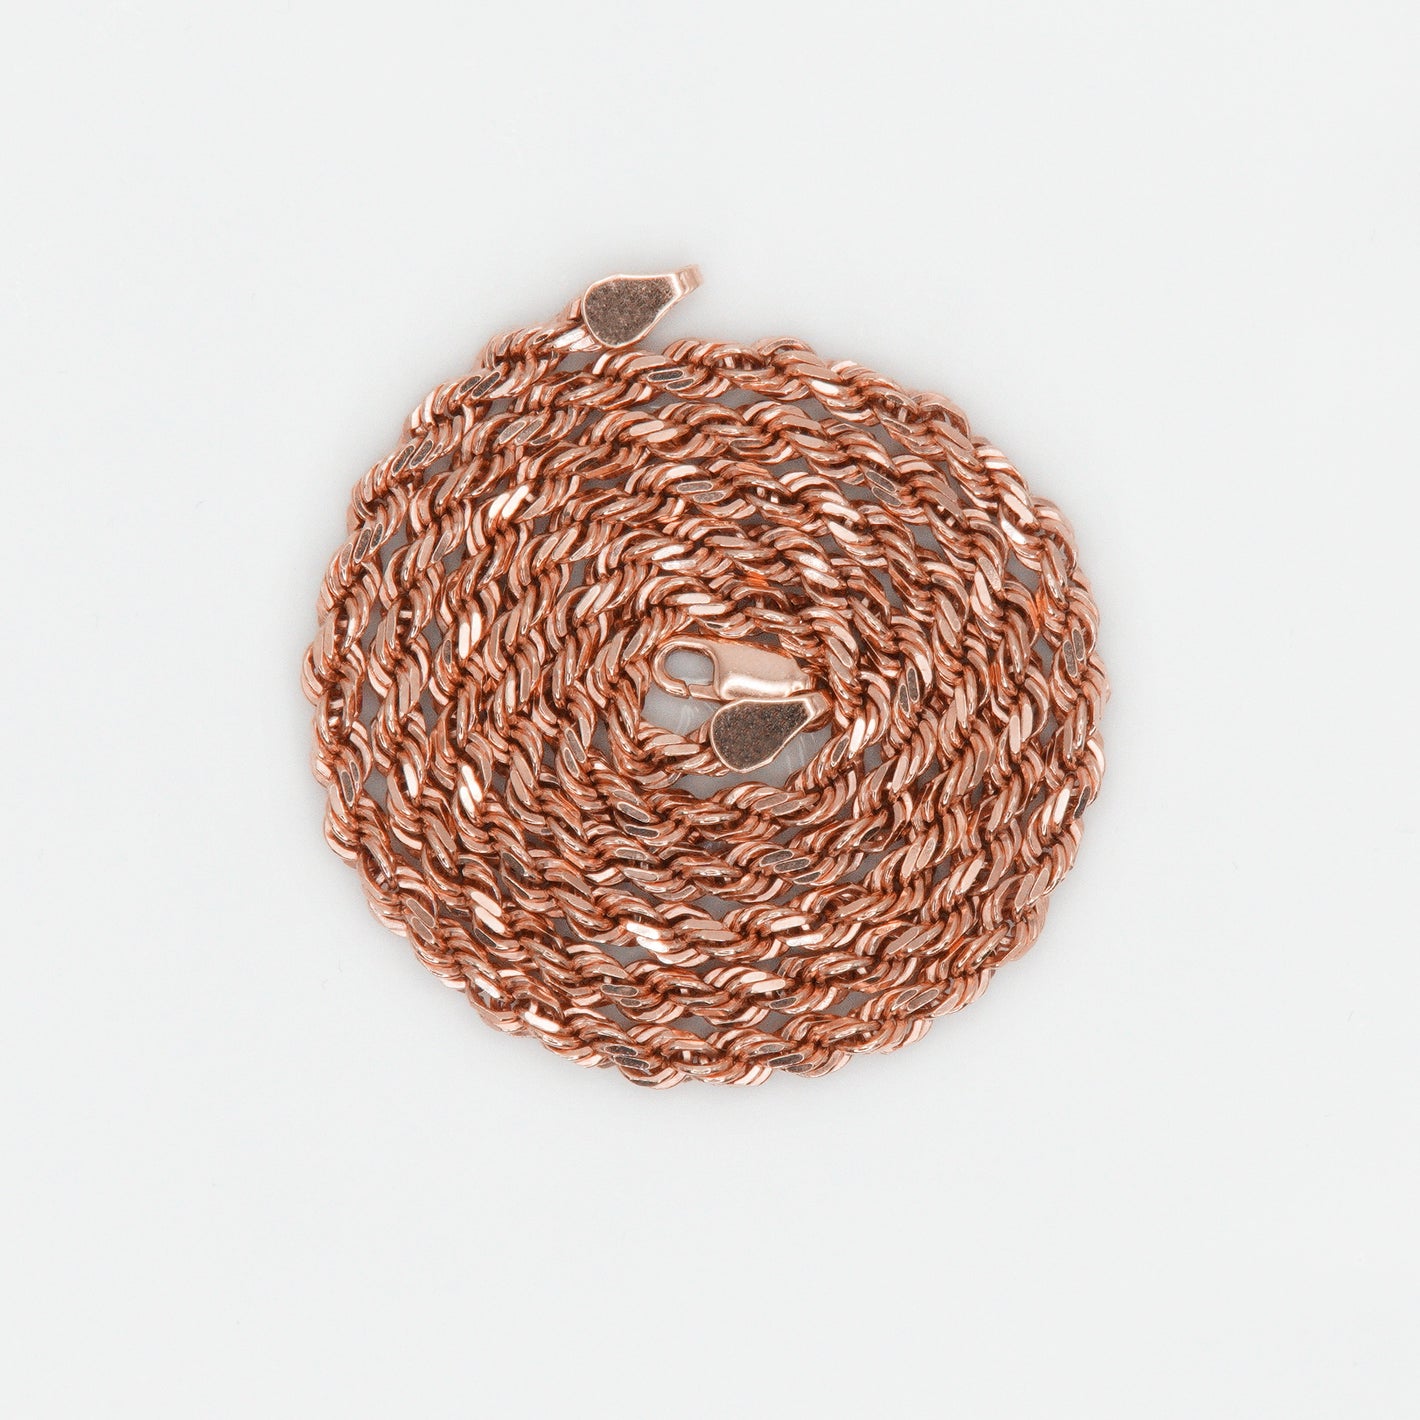 10k Solid Rose Gold 2.5mm Rope Chain